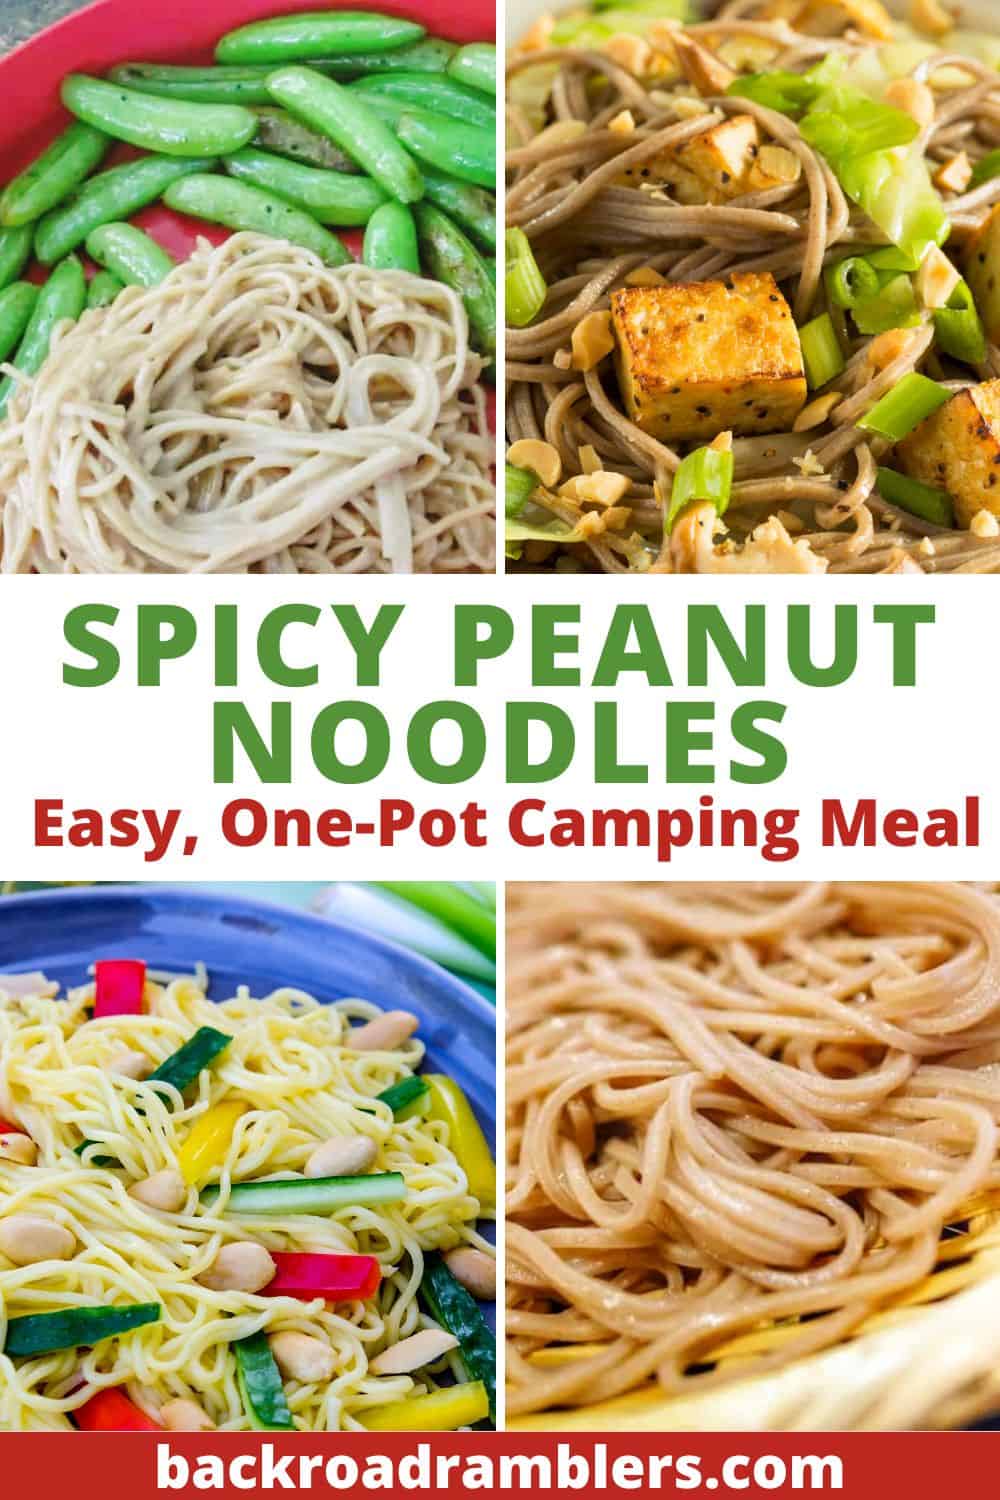 A collage of photos featuring peanut noodles made in different ways. Text overlay: Spicy Peanut Noodles, easy, one-pot camping meal.